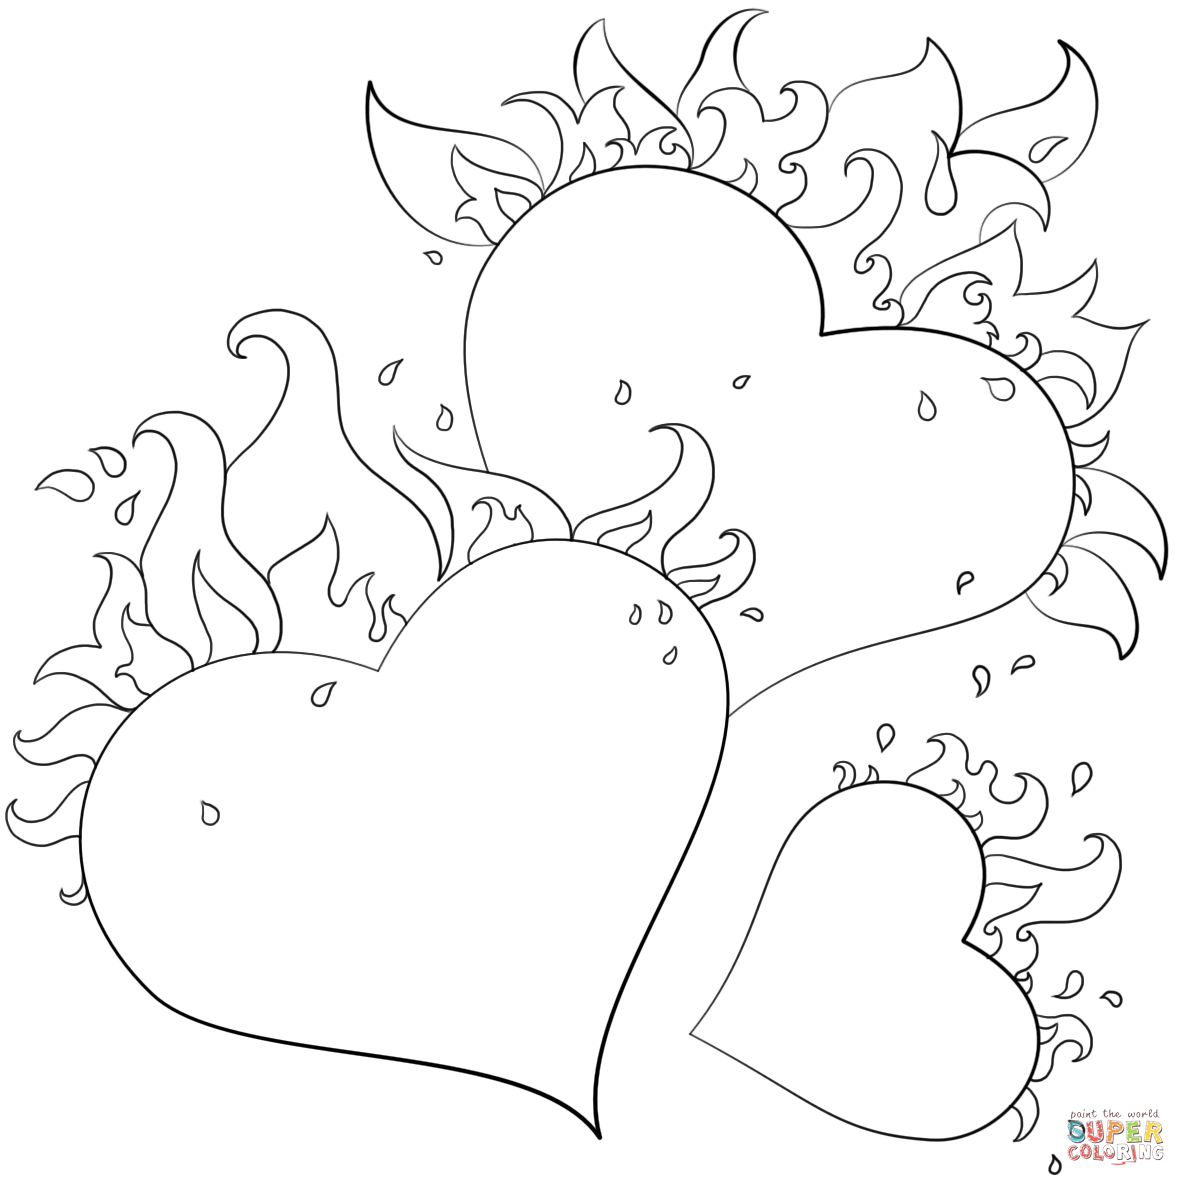 Free Coloring Pages Hearts Hearts With Flames Coloring Page Free Printable Coloring Pages